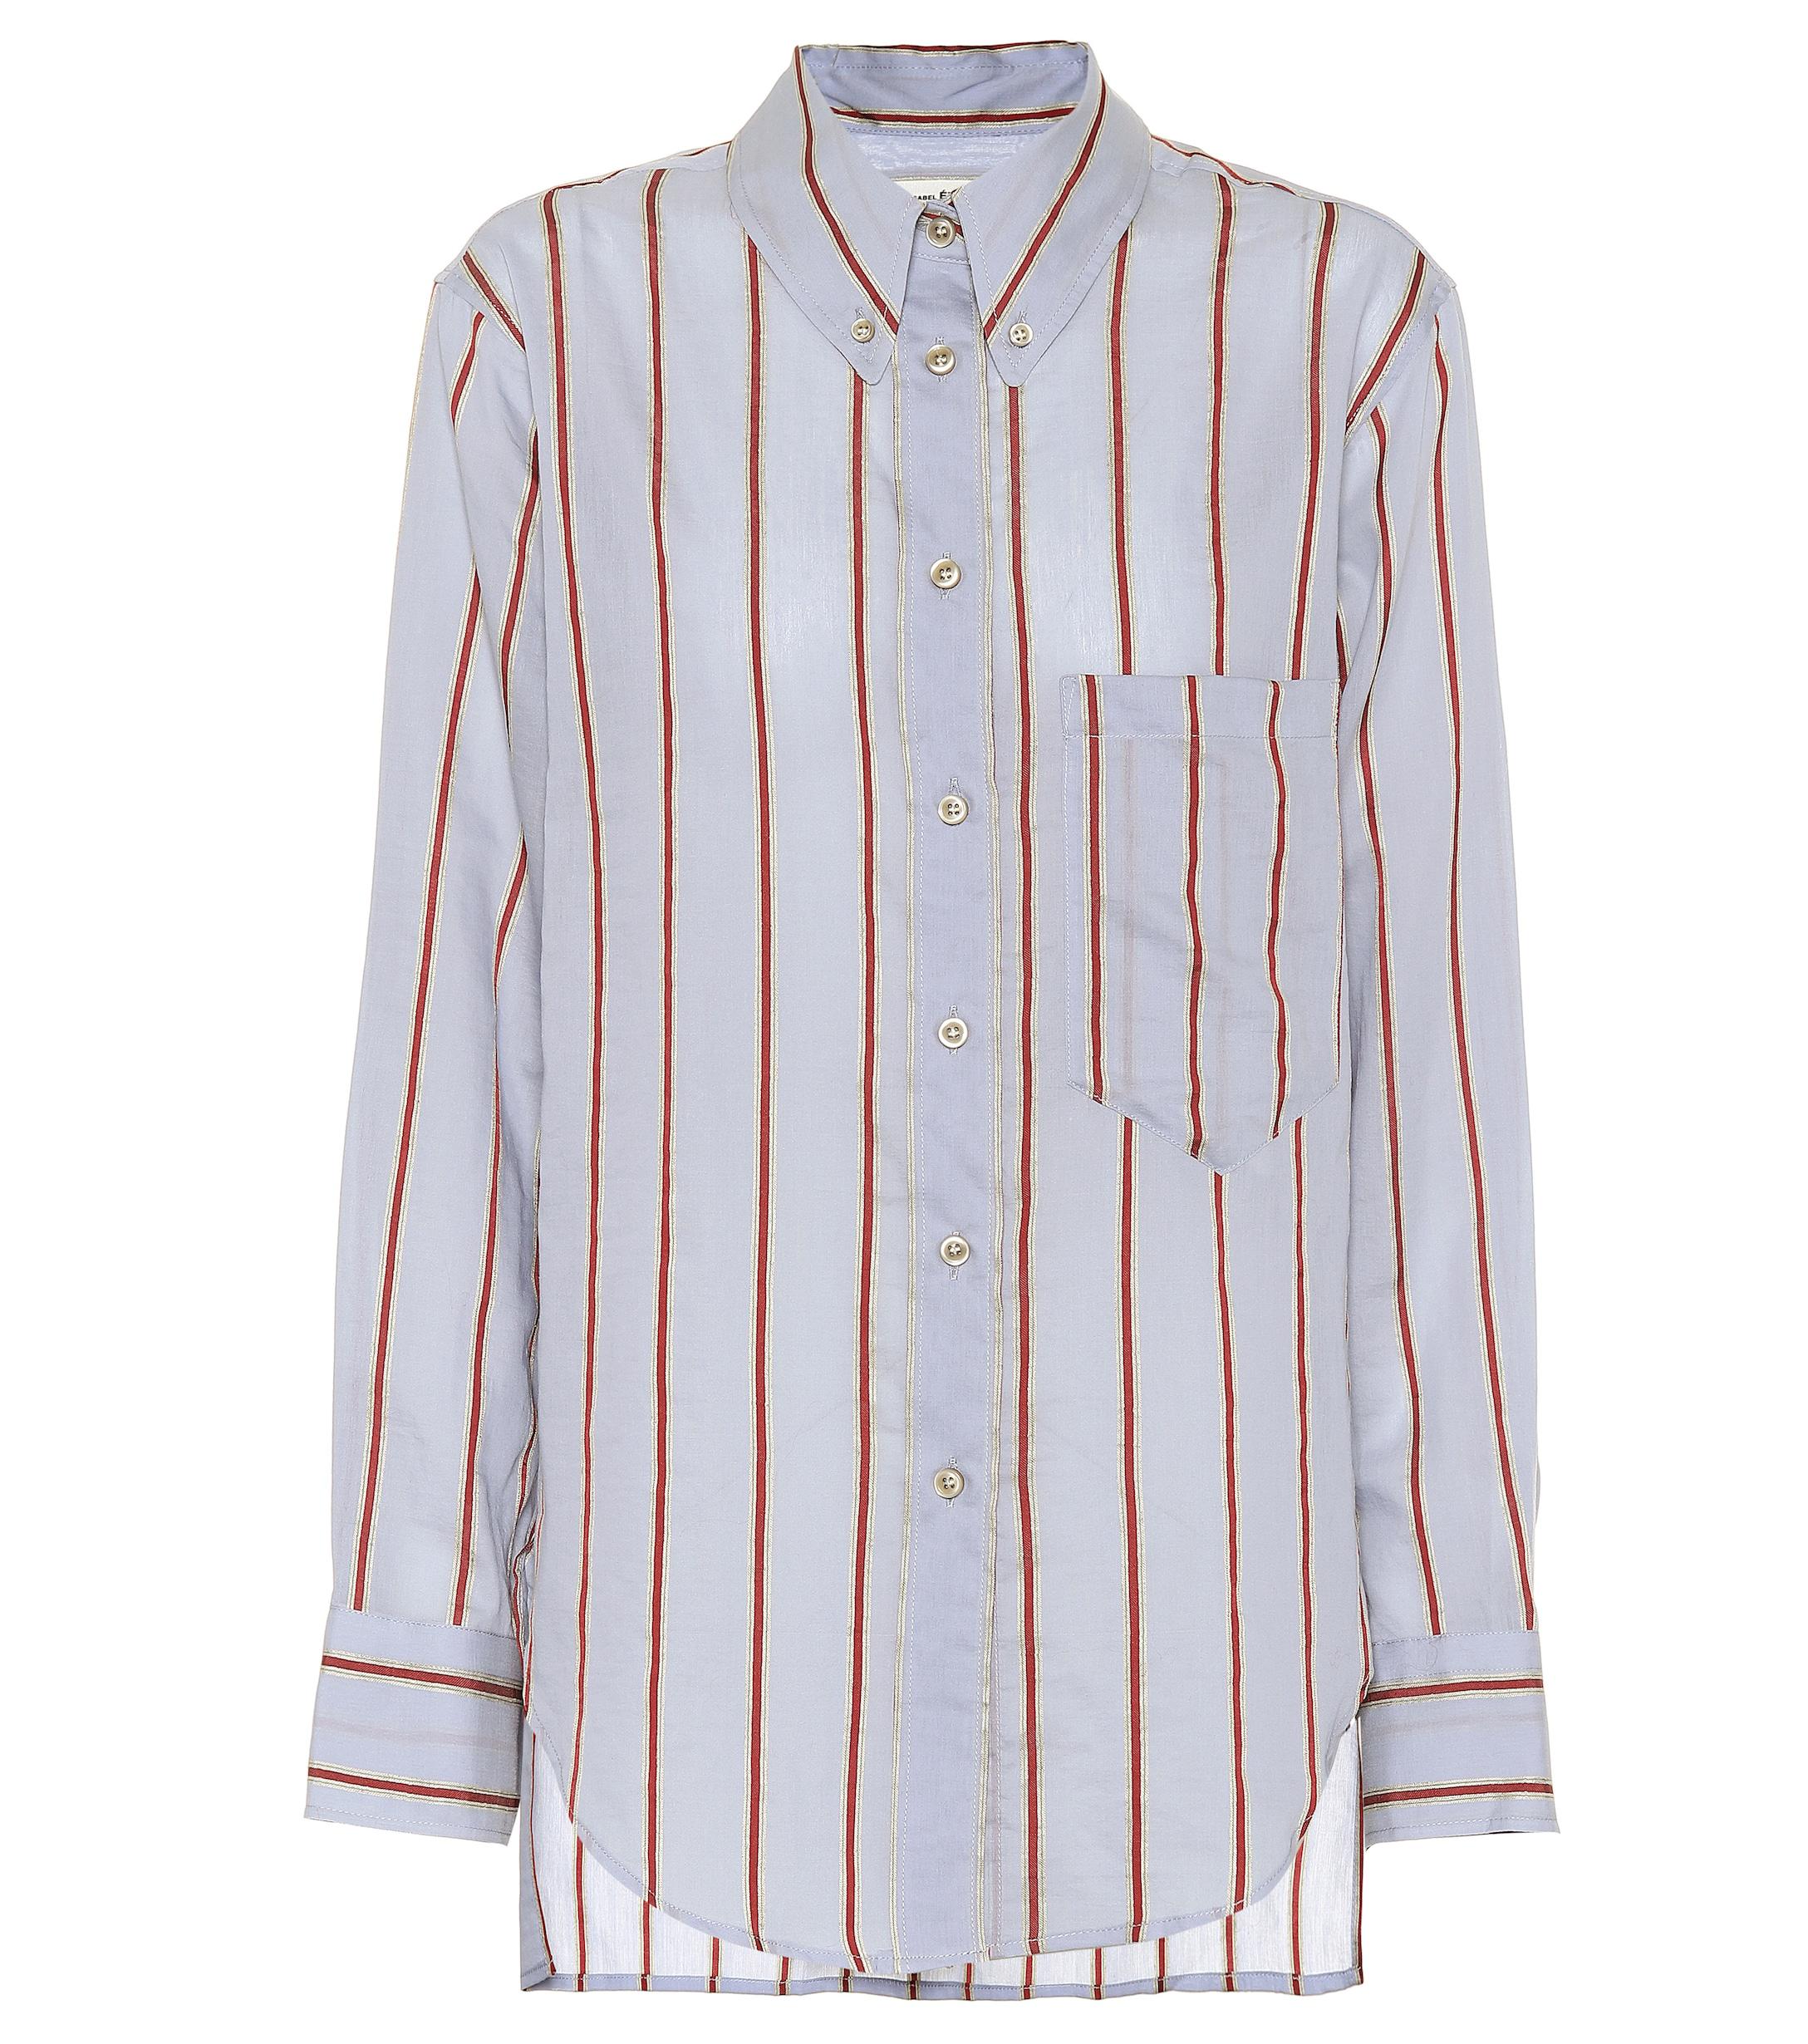 Lyst - Étoile Isabel Marant Yvana Striped Cotton-blend Shirt in Blue